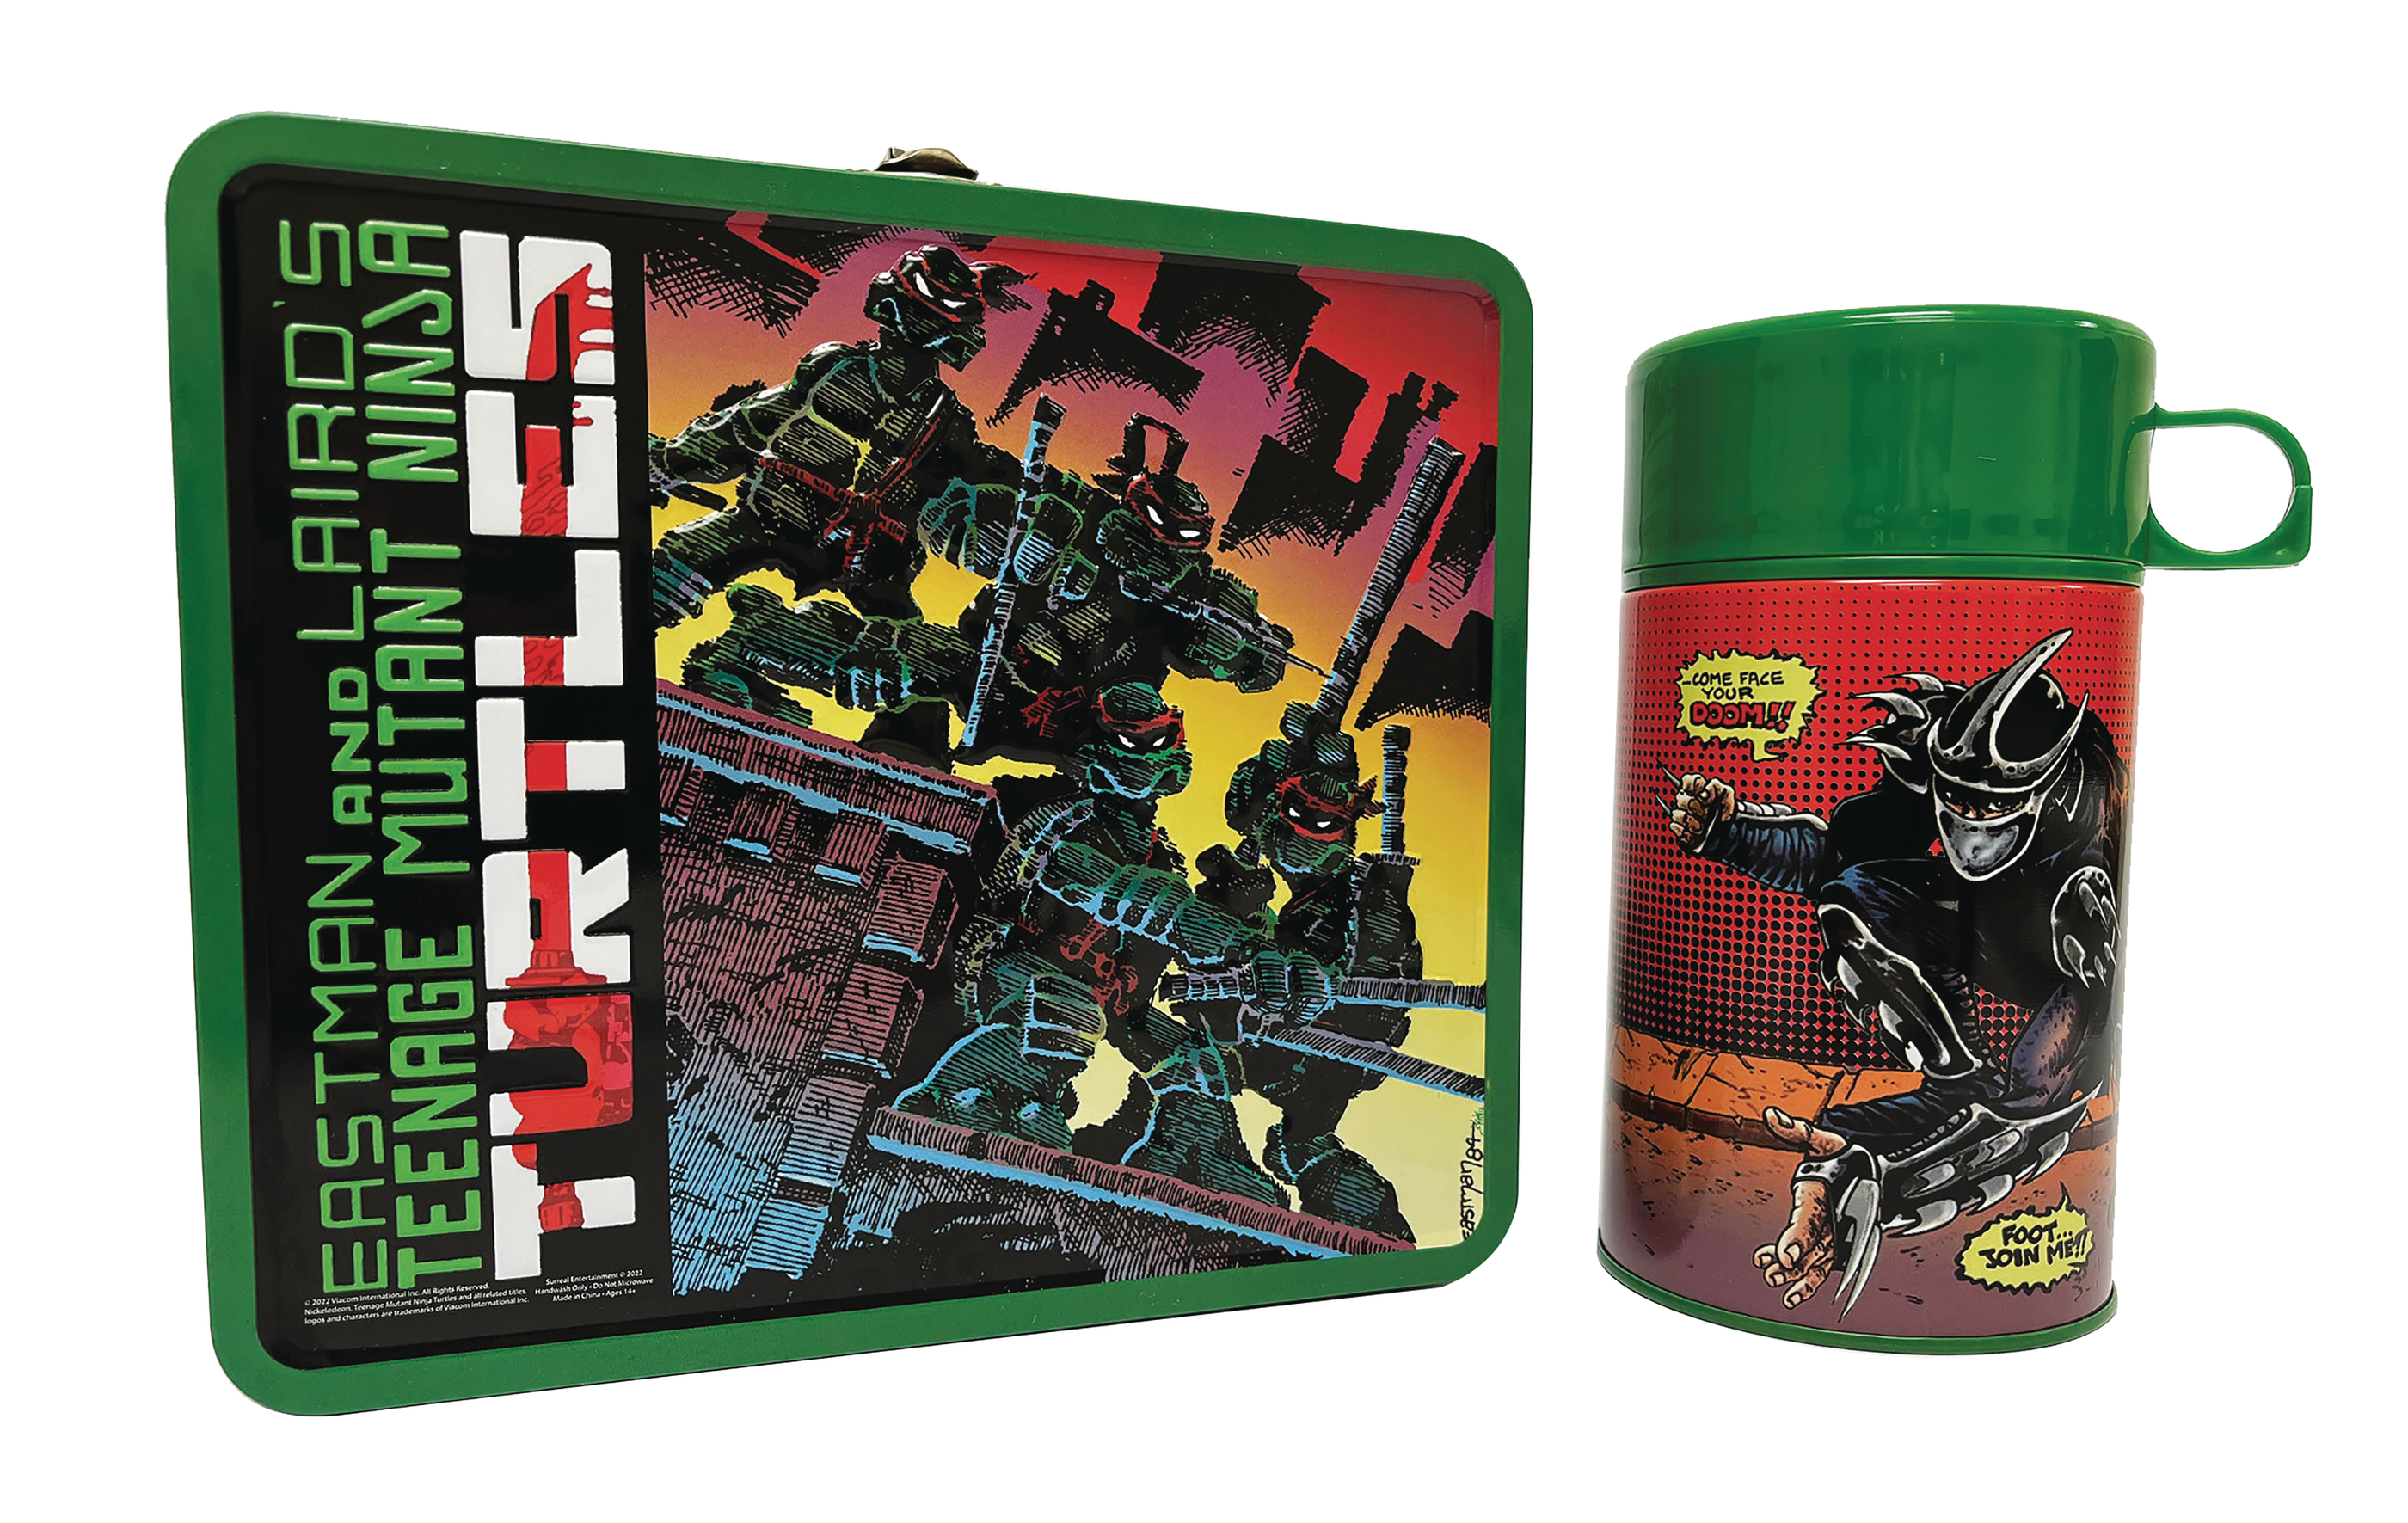 Teenage Mutant Ninja Turtles Classic Comic #1 Px Lunch Box With Thermos